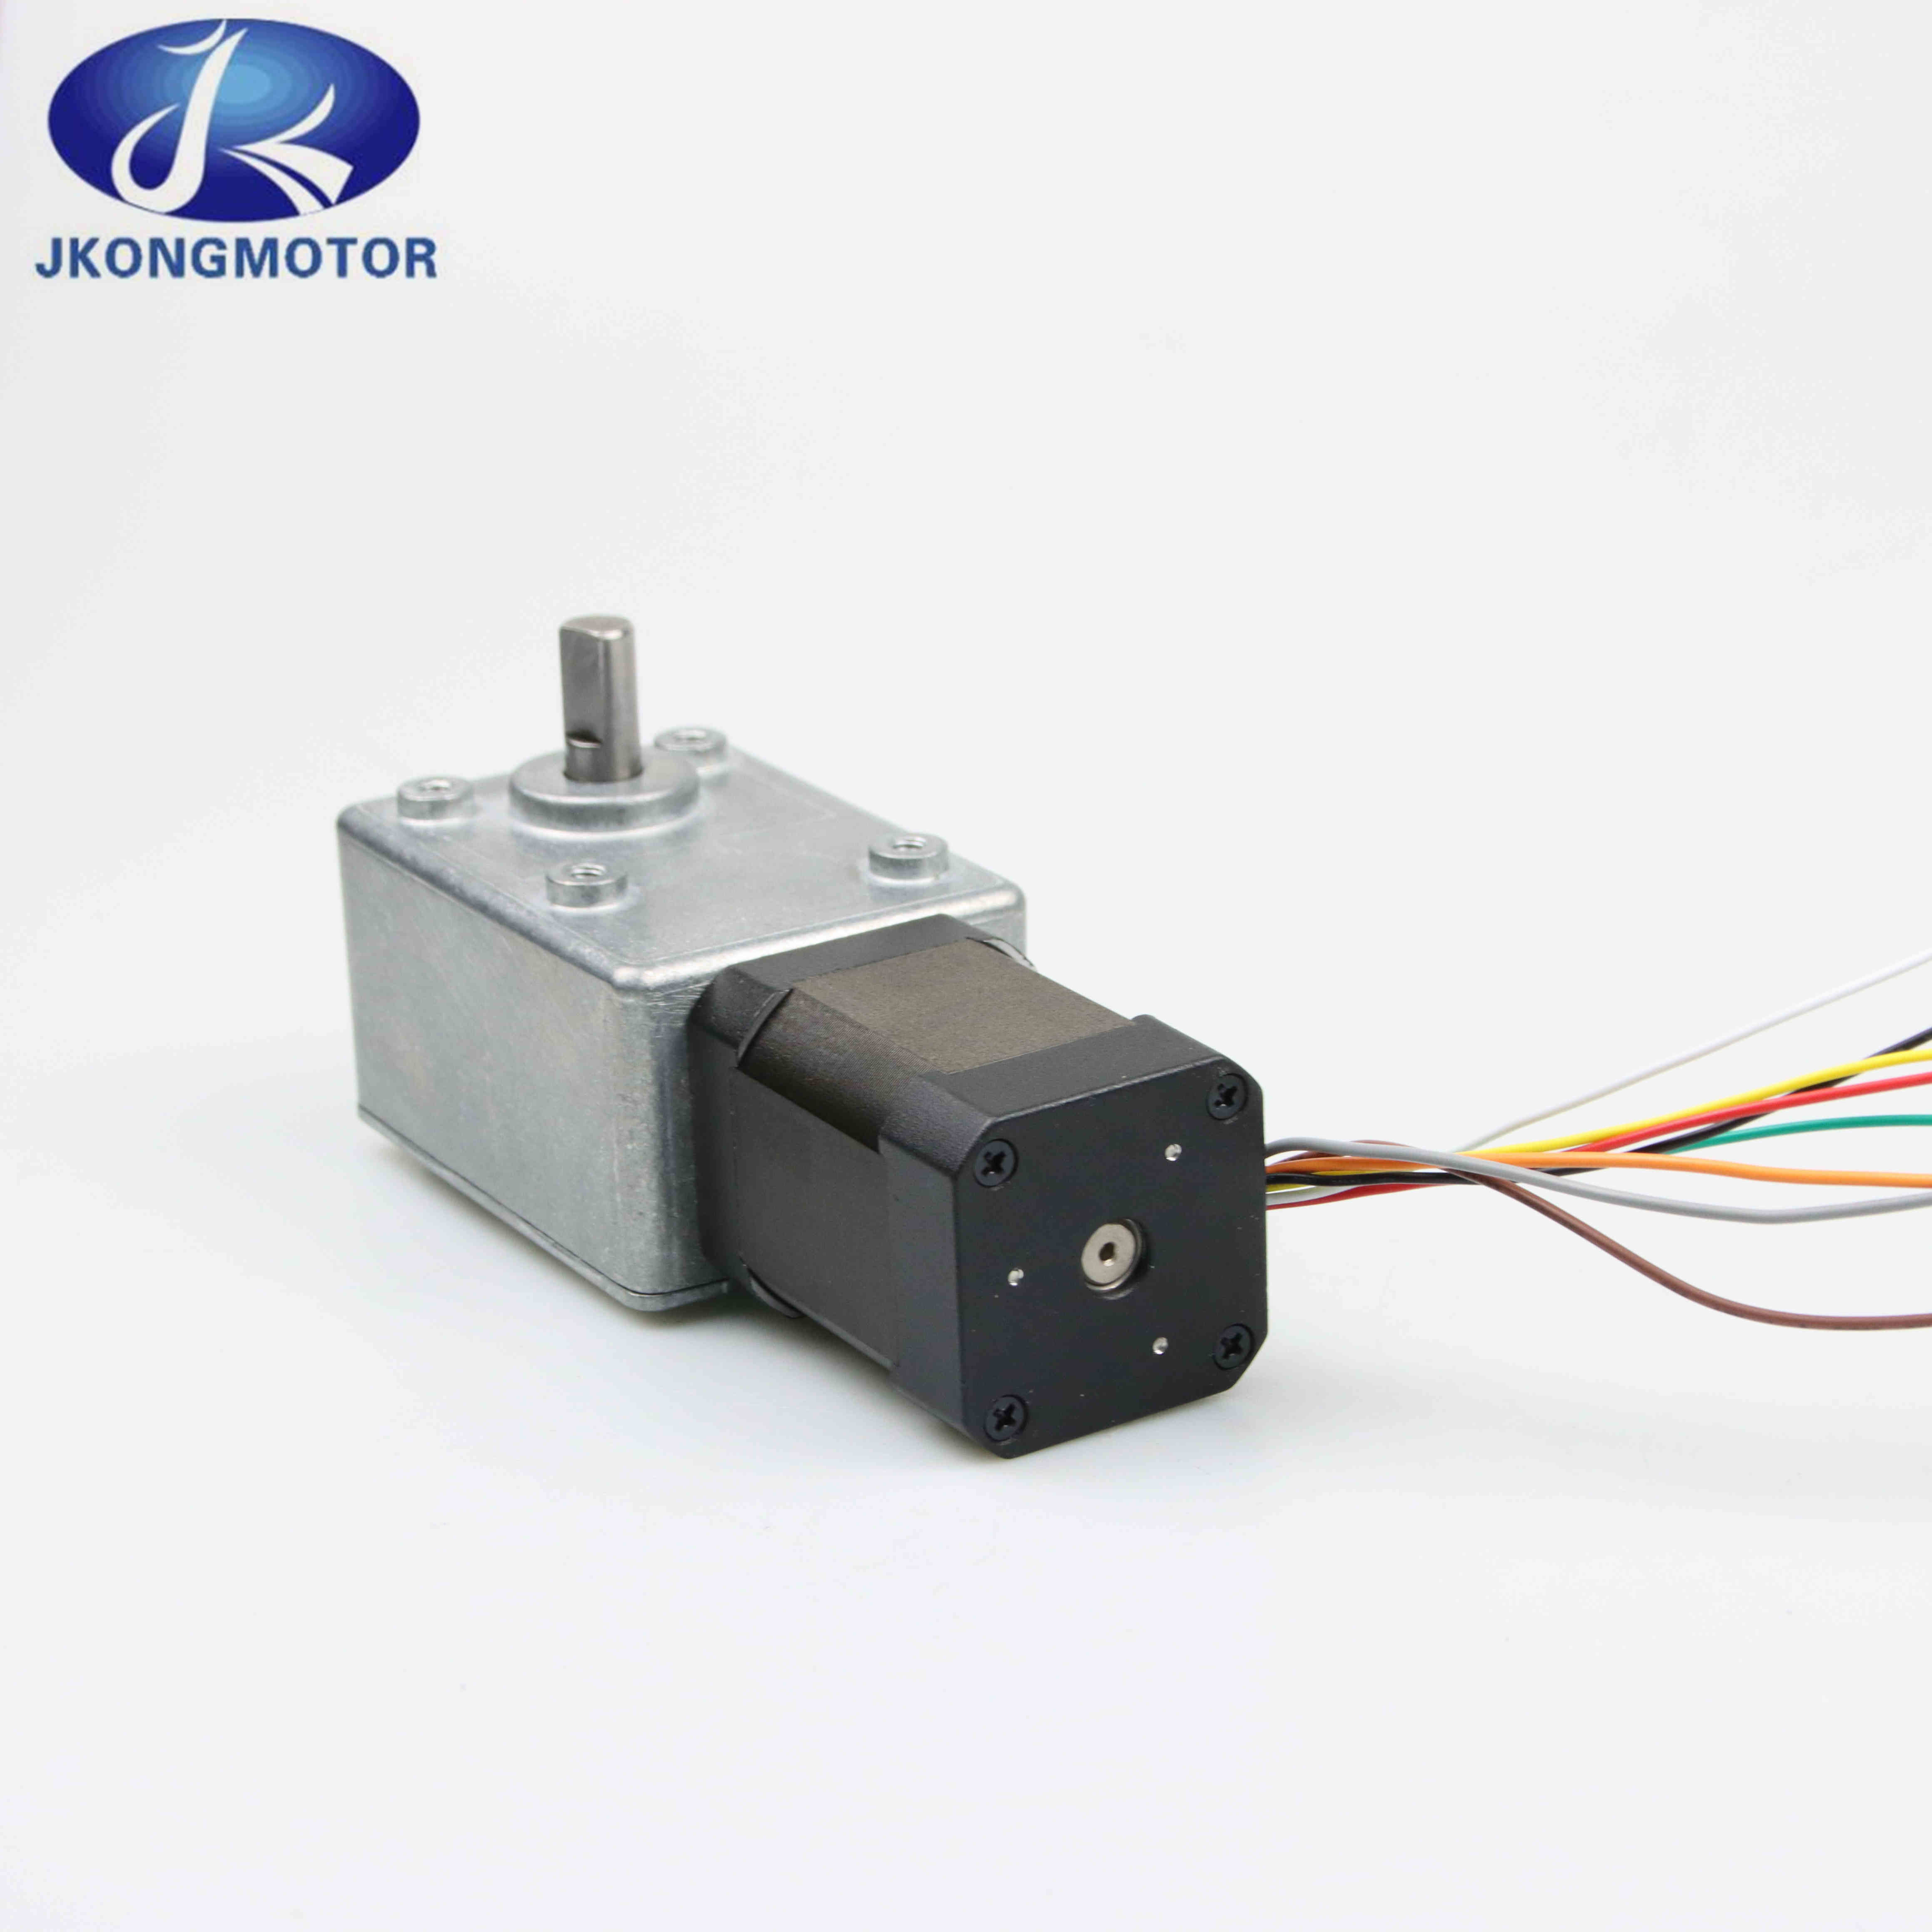 24V 52W 4000rpm Gearbox High Torque Bldc Permanent Magnet